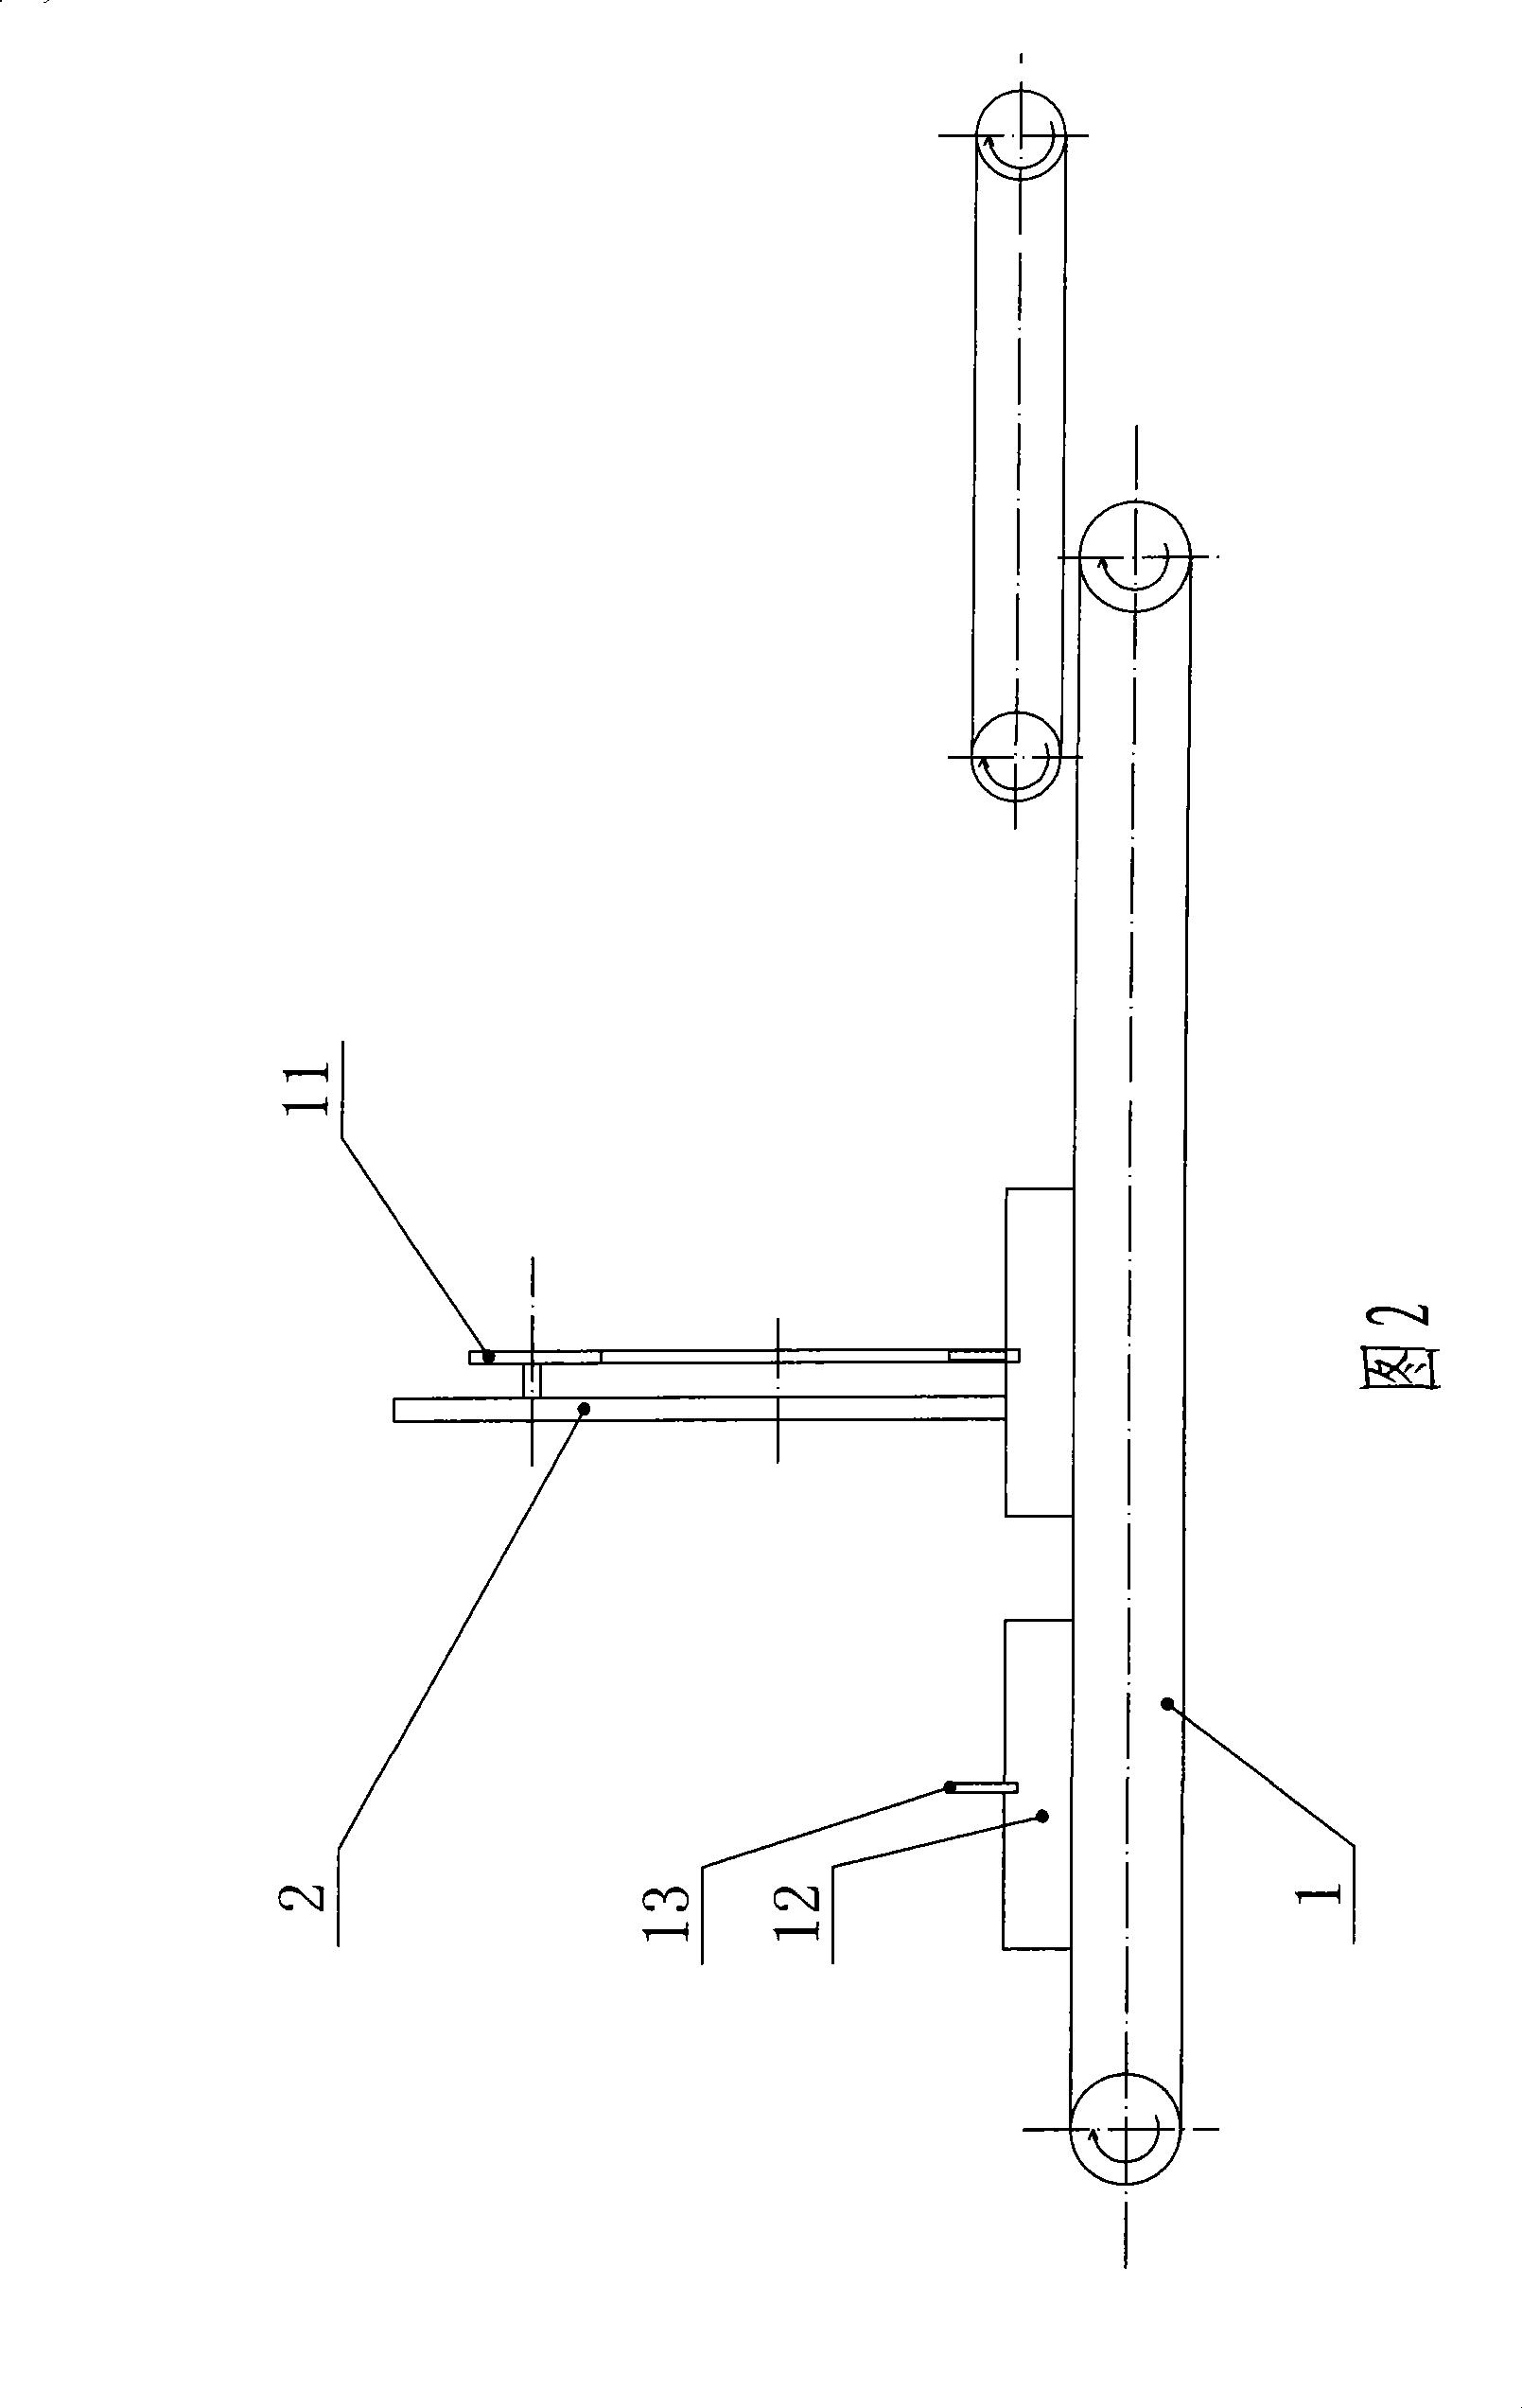 Paster apparatus of battery pole ear